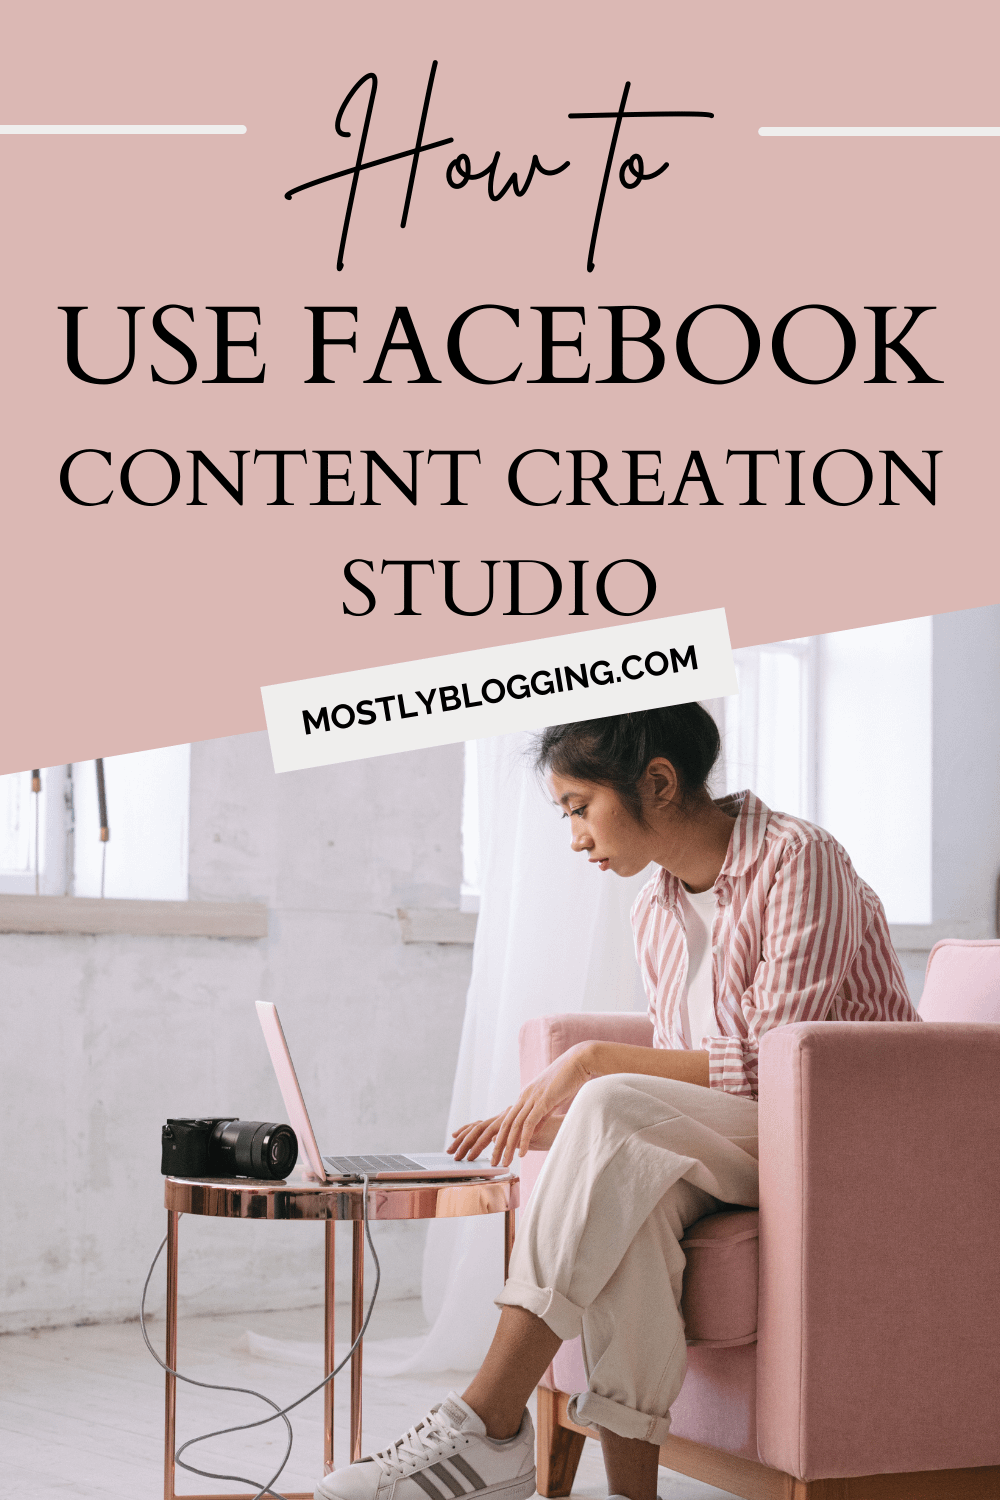 Content Creation Studio: How to Use Facebook Creator Studio in 5 Easy Steps